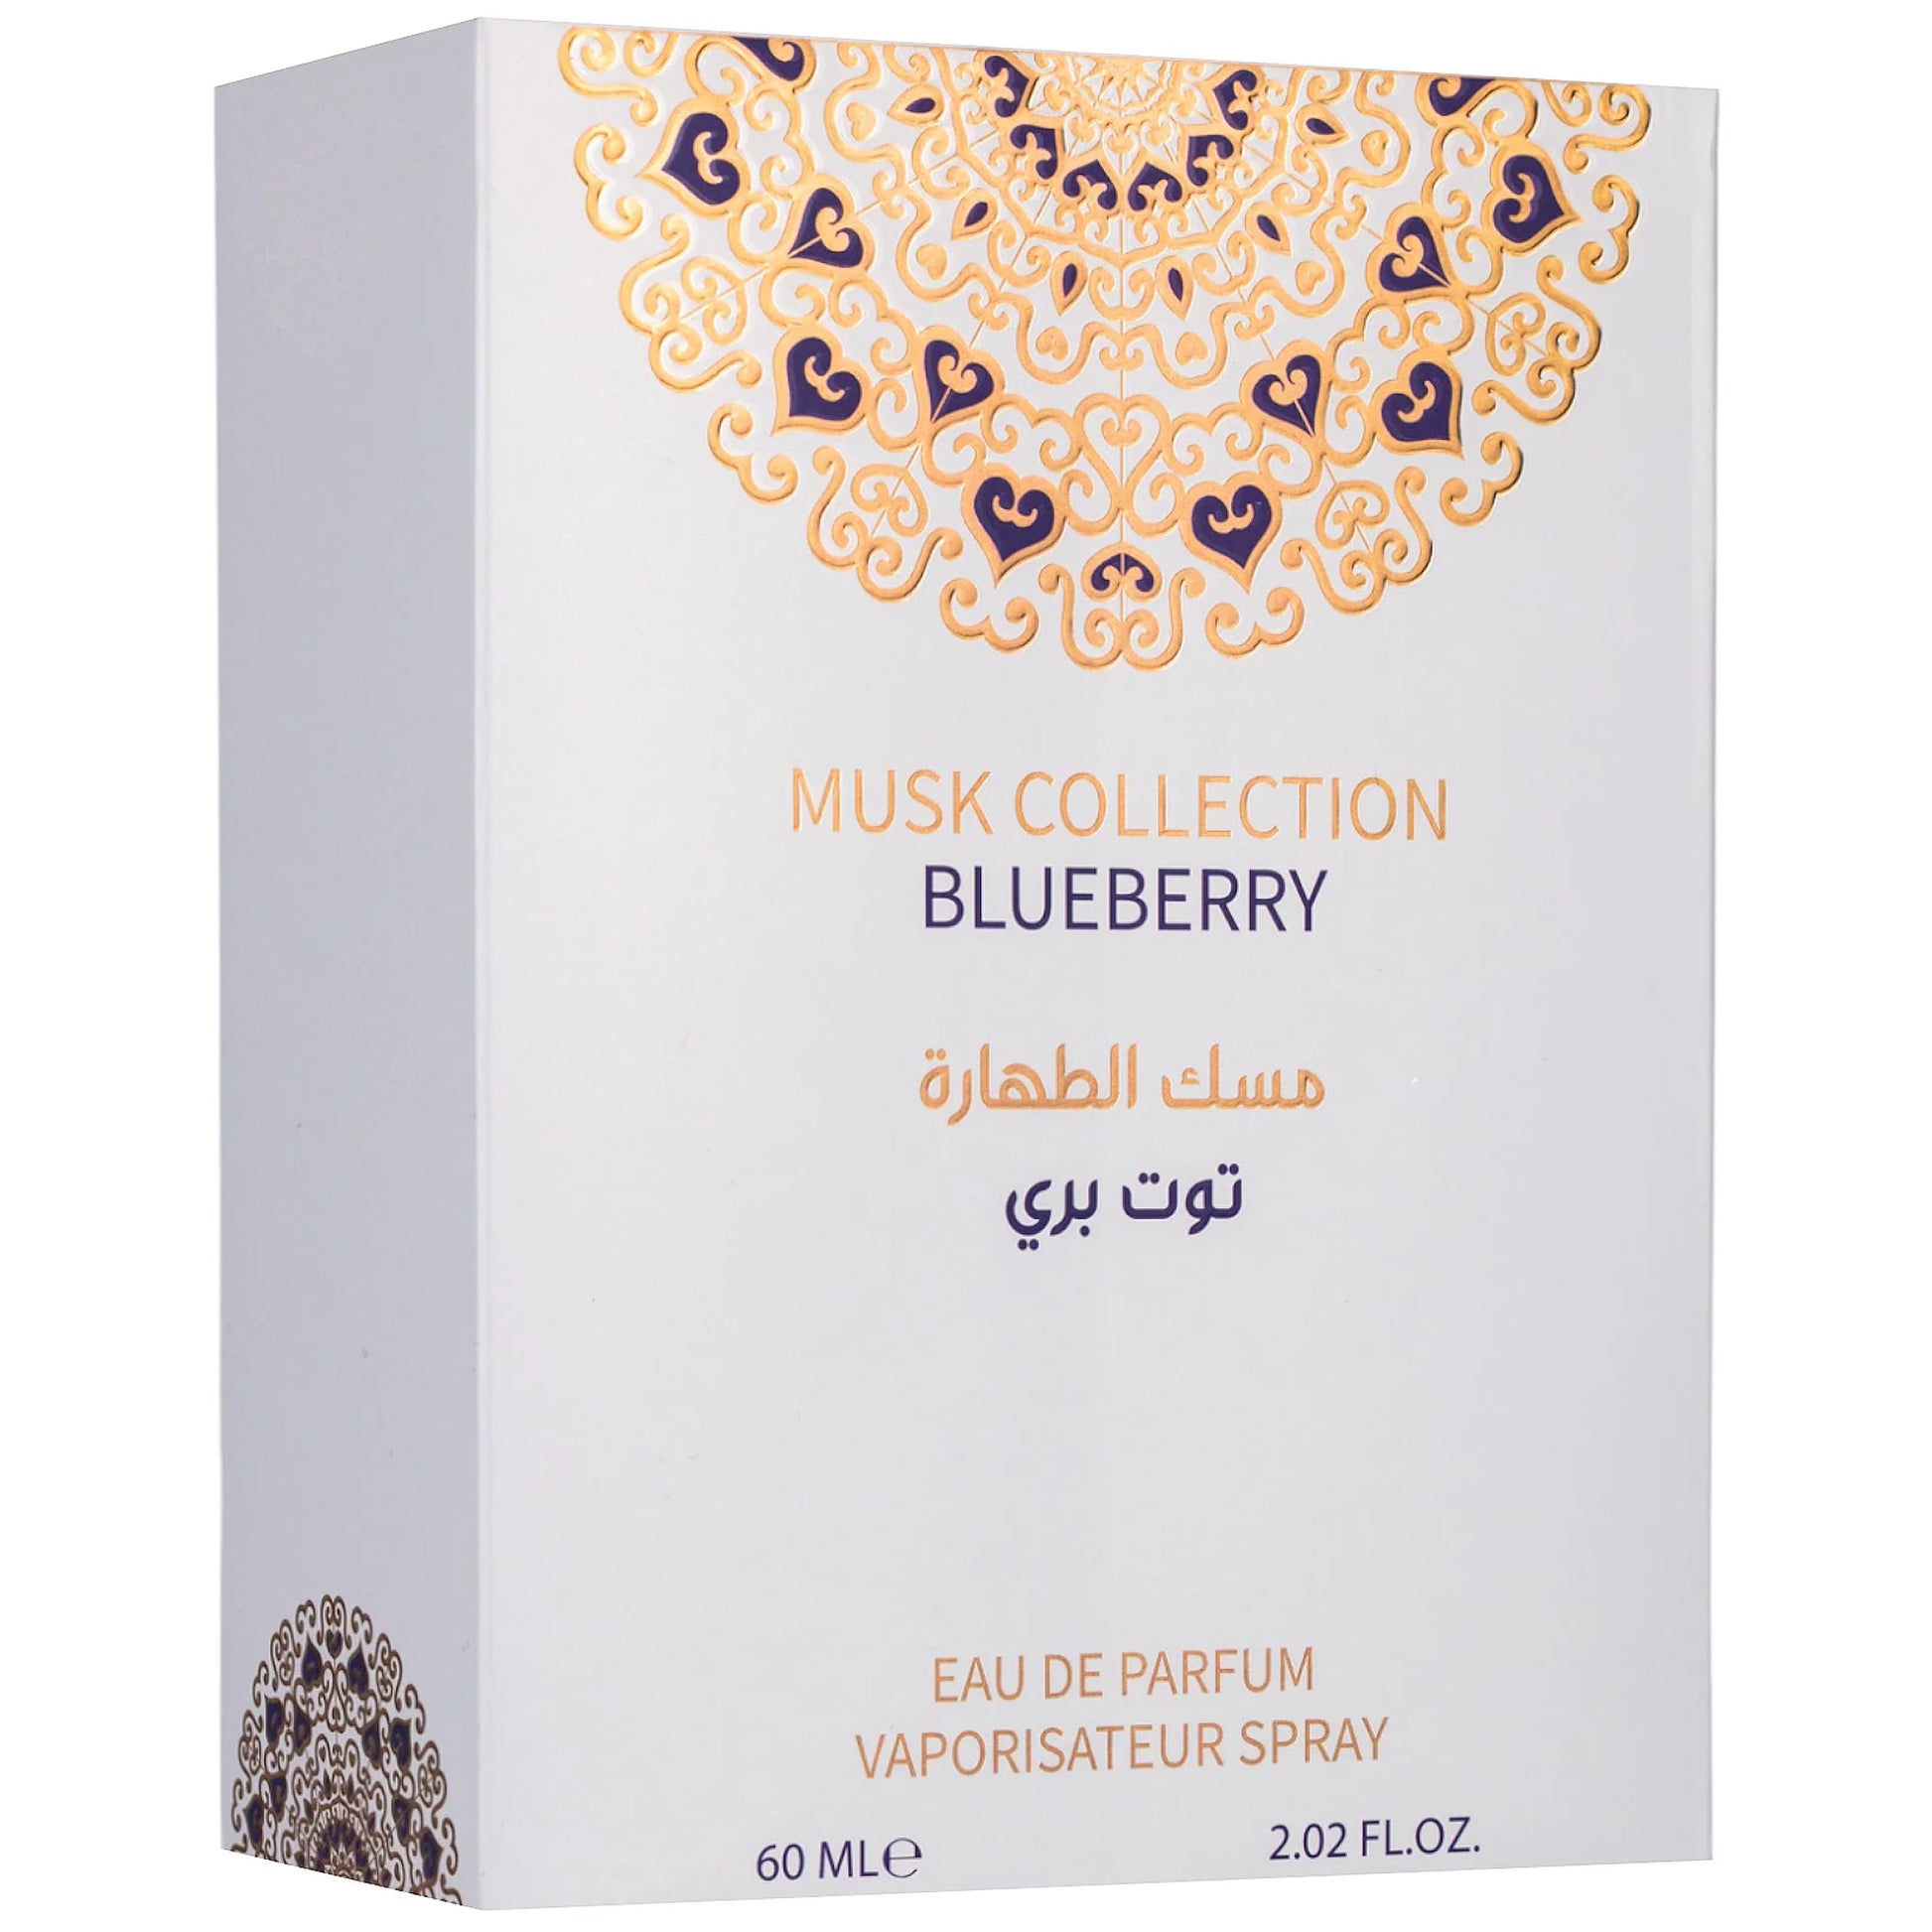  Blueberry - Musk Collection for men and women